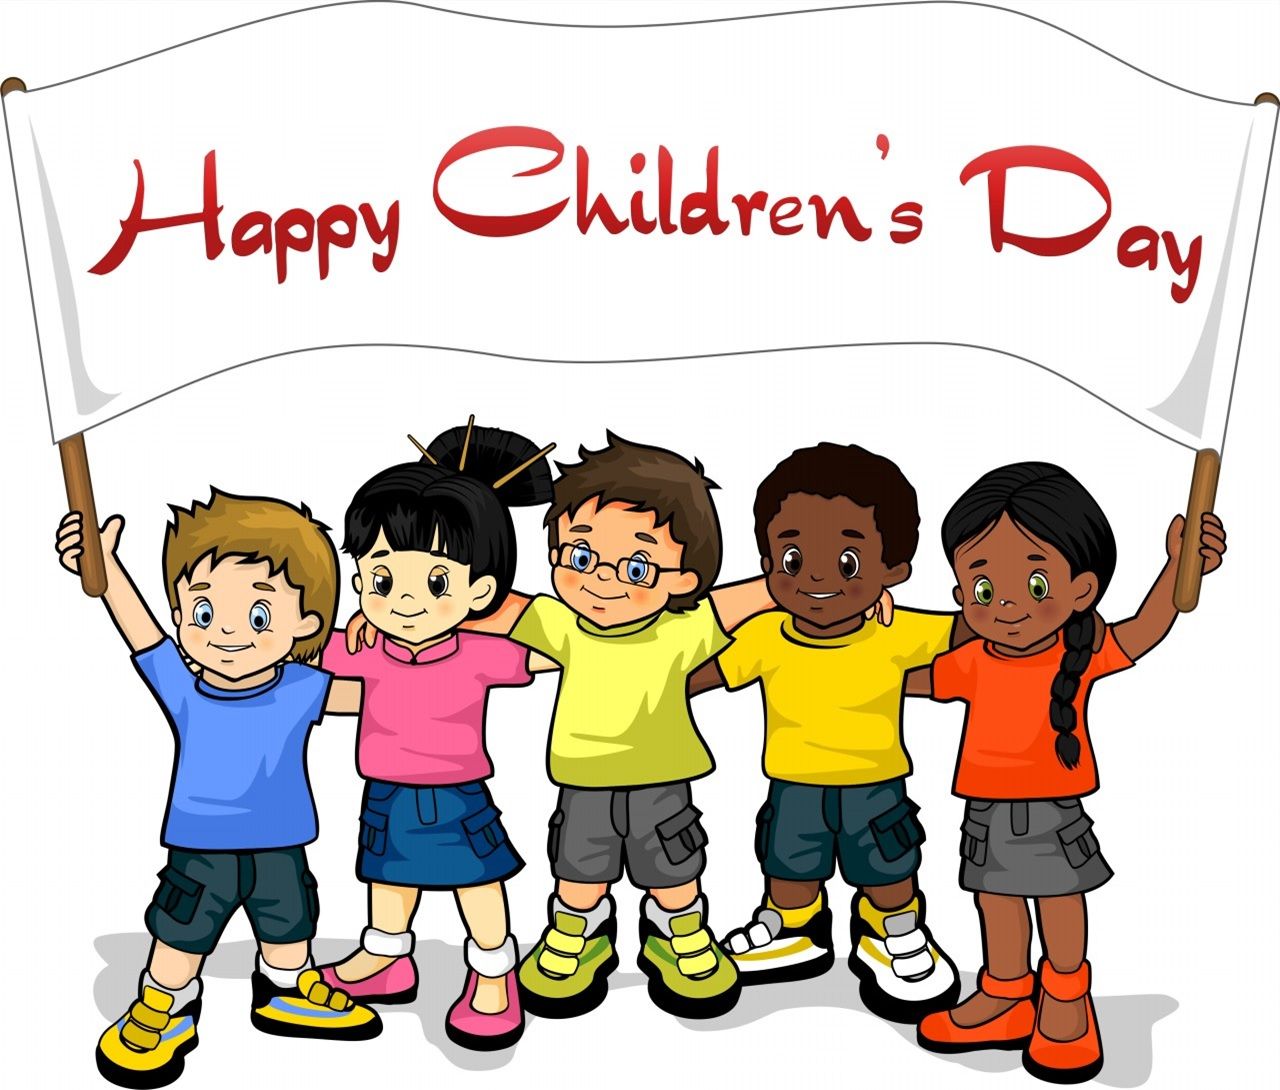 Childrens Day Image HD Wallpaper